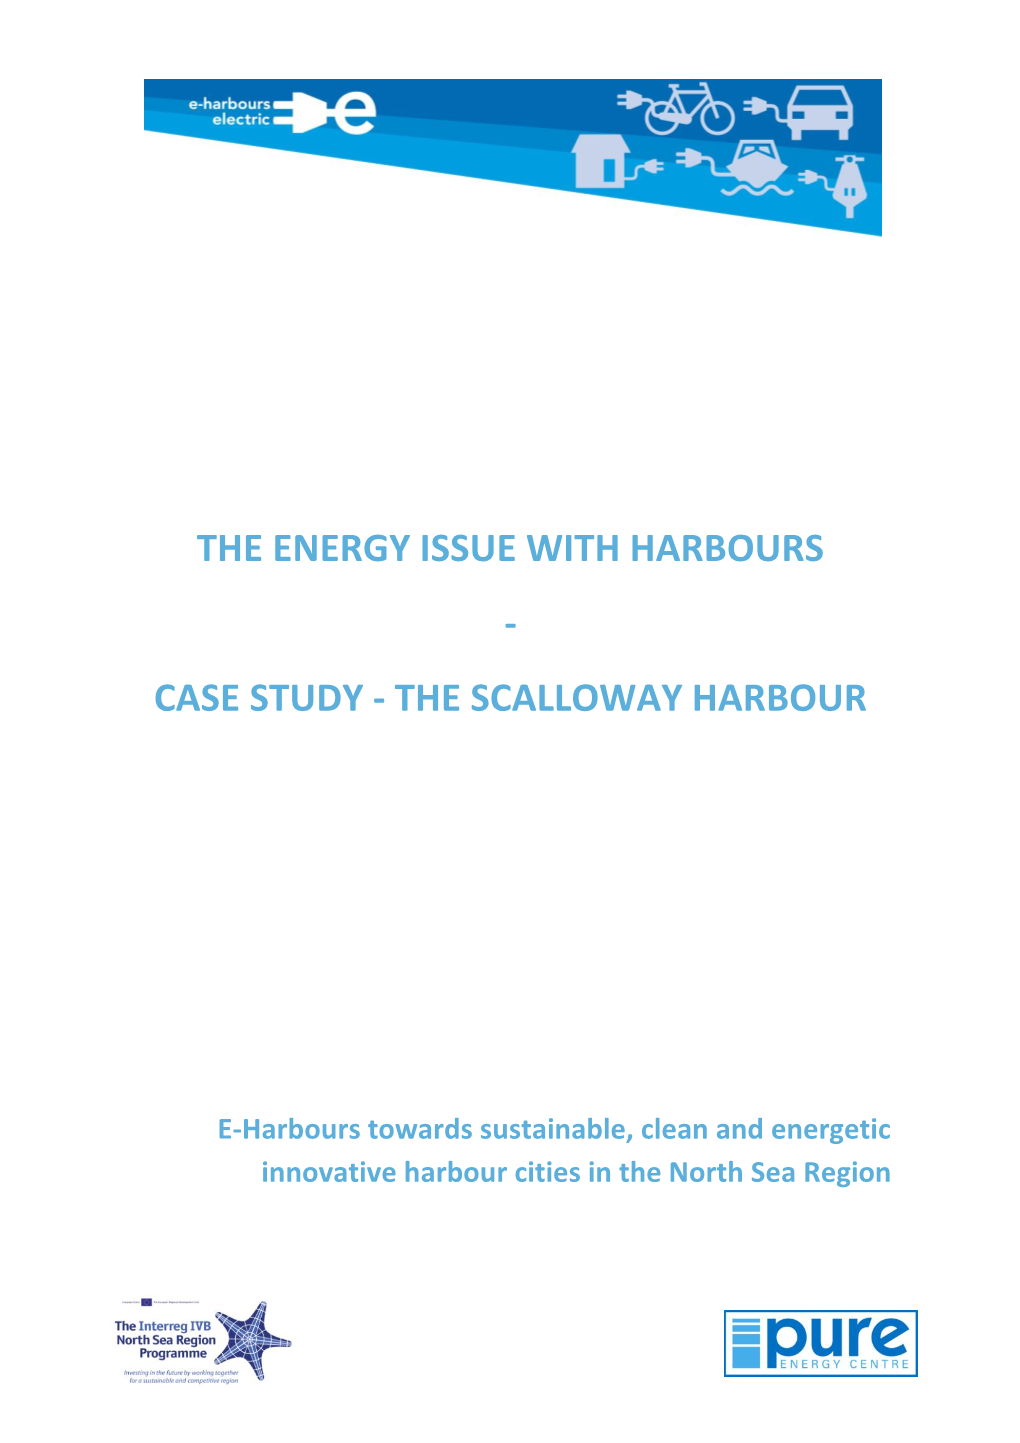 Case Study - the Scalloway Harbour